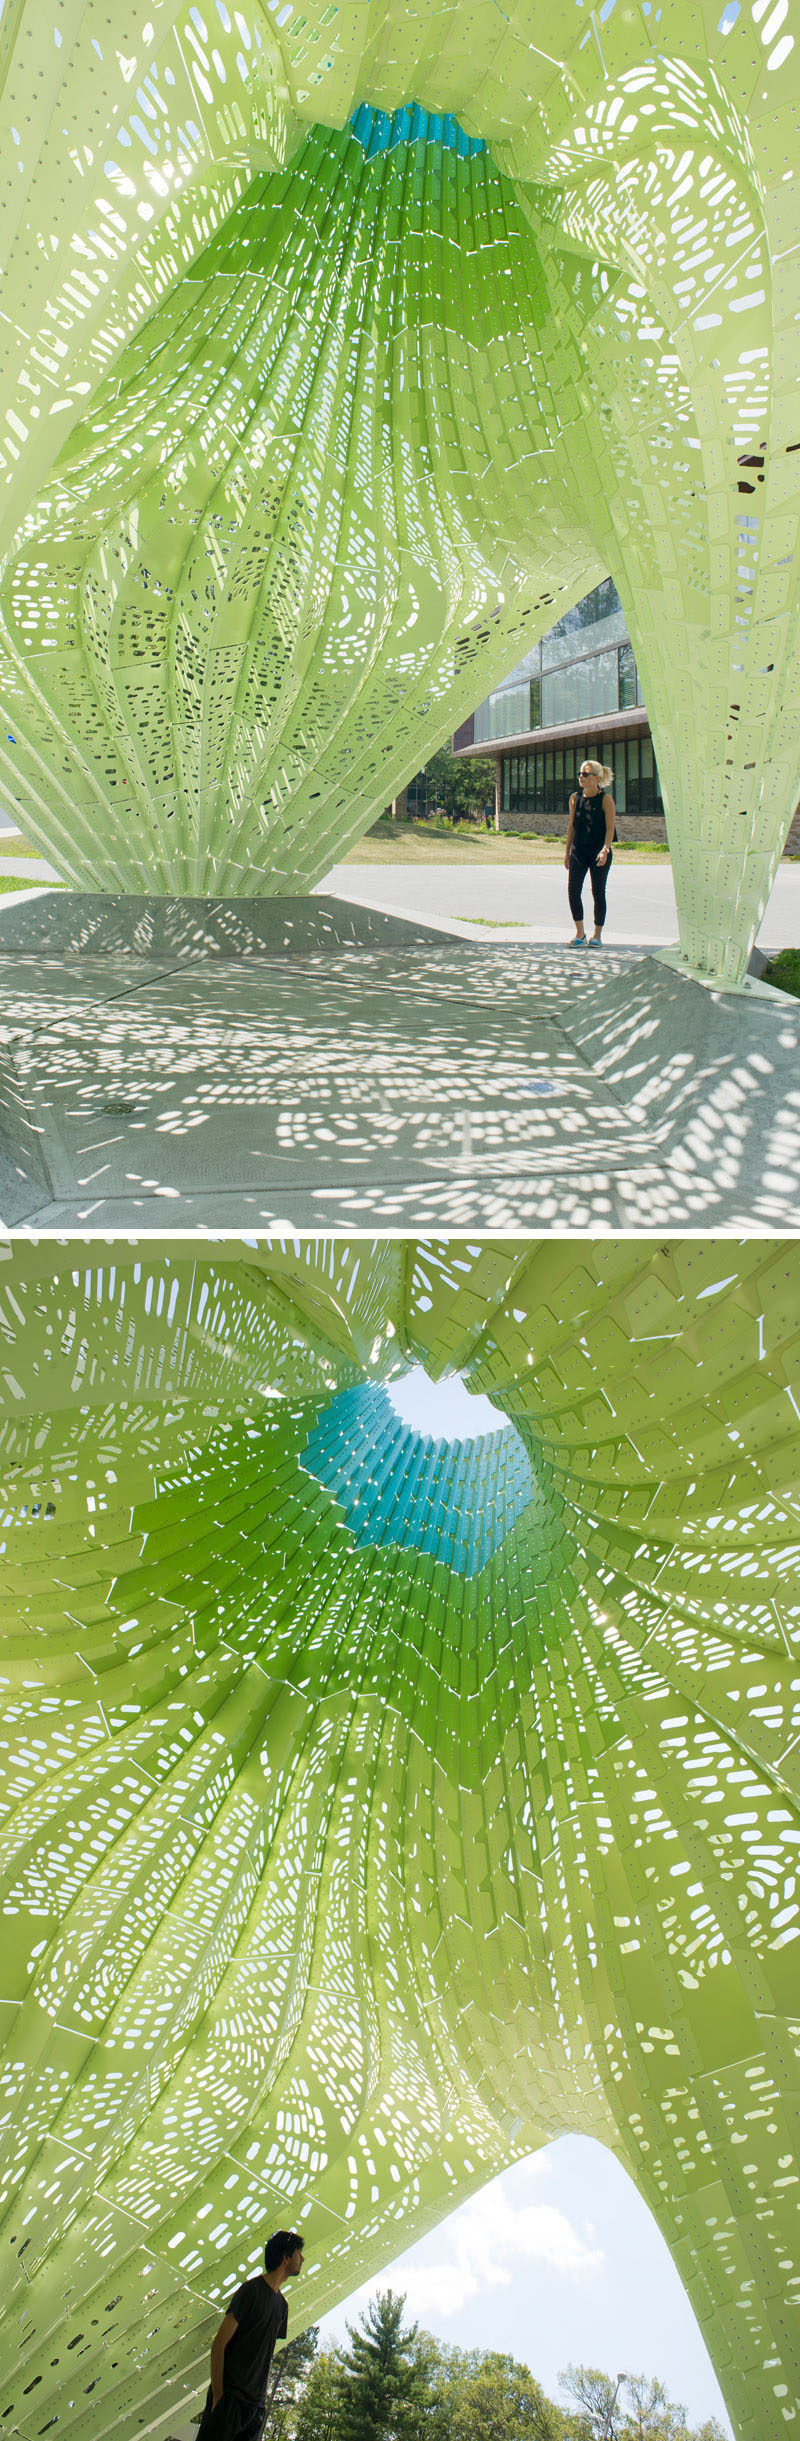 Marc Fornes / THEVERYMANY have recently completed their latest sculptural design HYPARBOLE, that sits at the entrance to Rhode Island College’s Fine Arts Center. #ModernArt #ModernSculpture #Sculpture #PublicArt